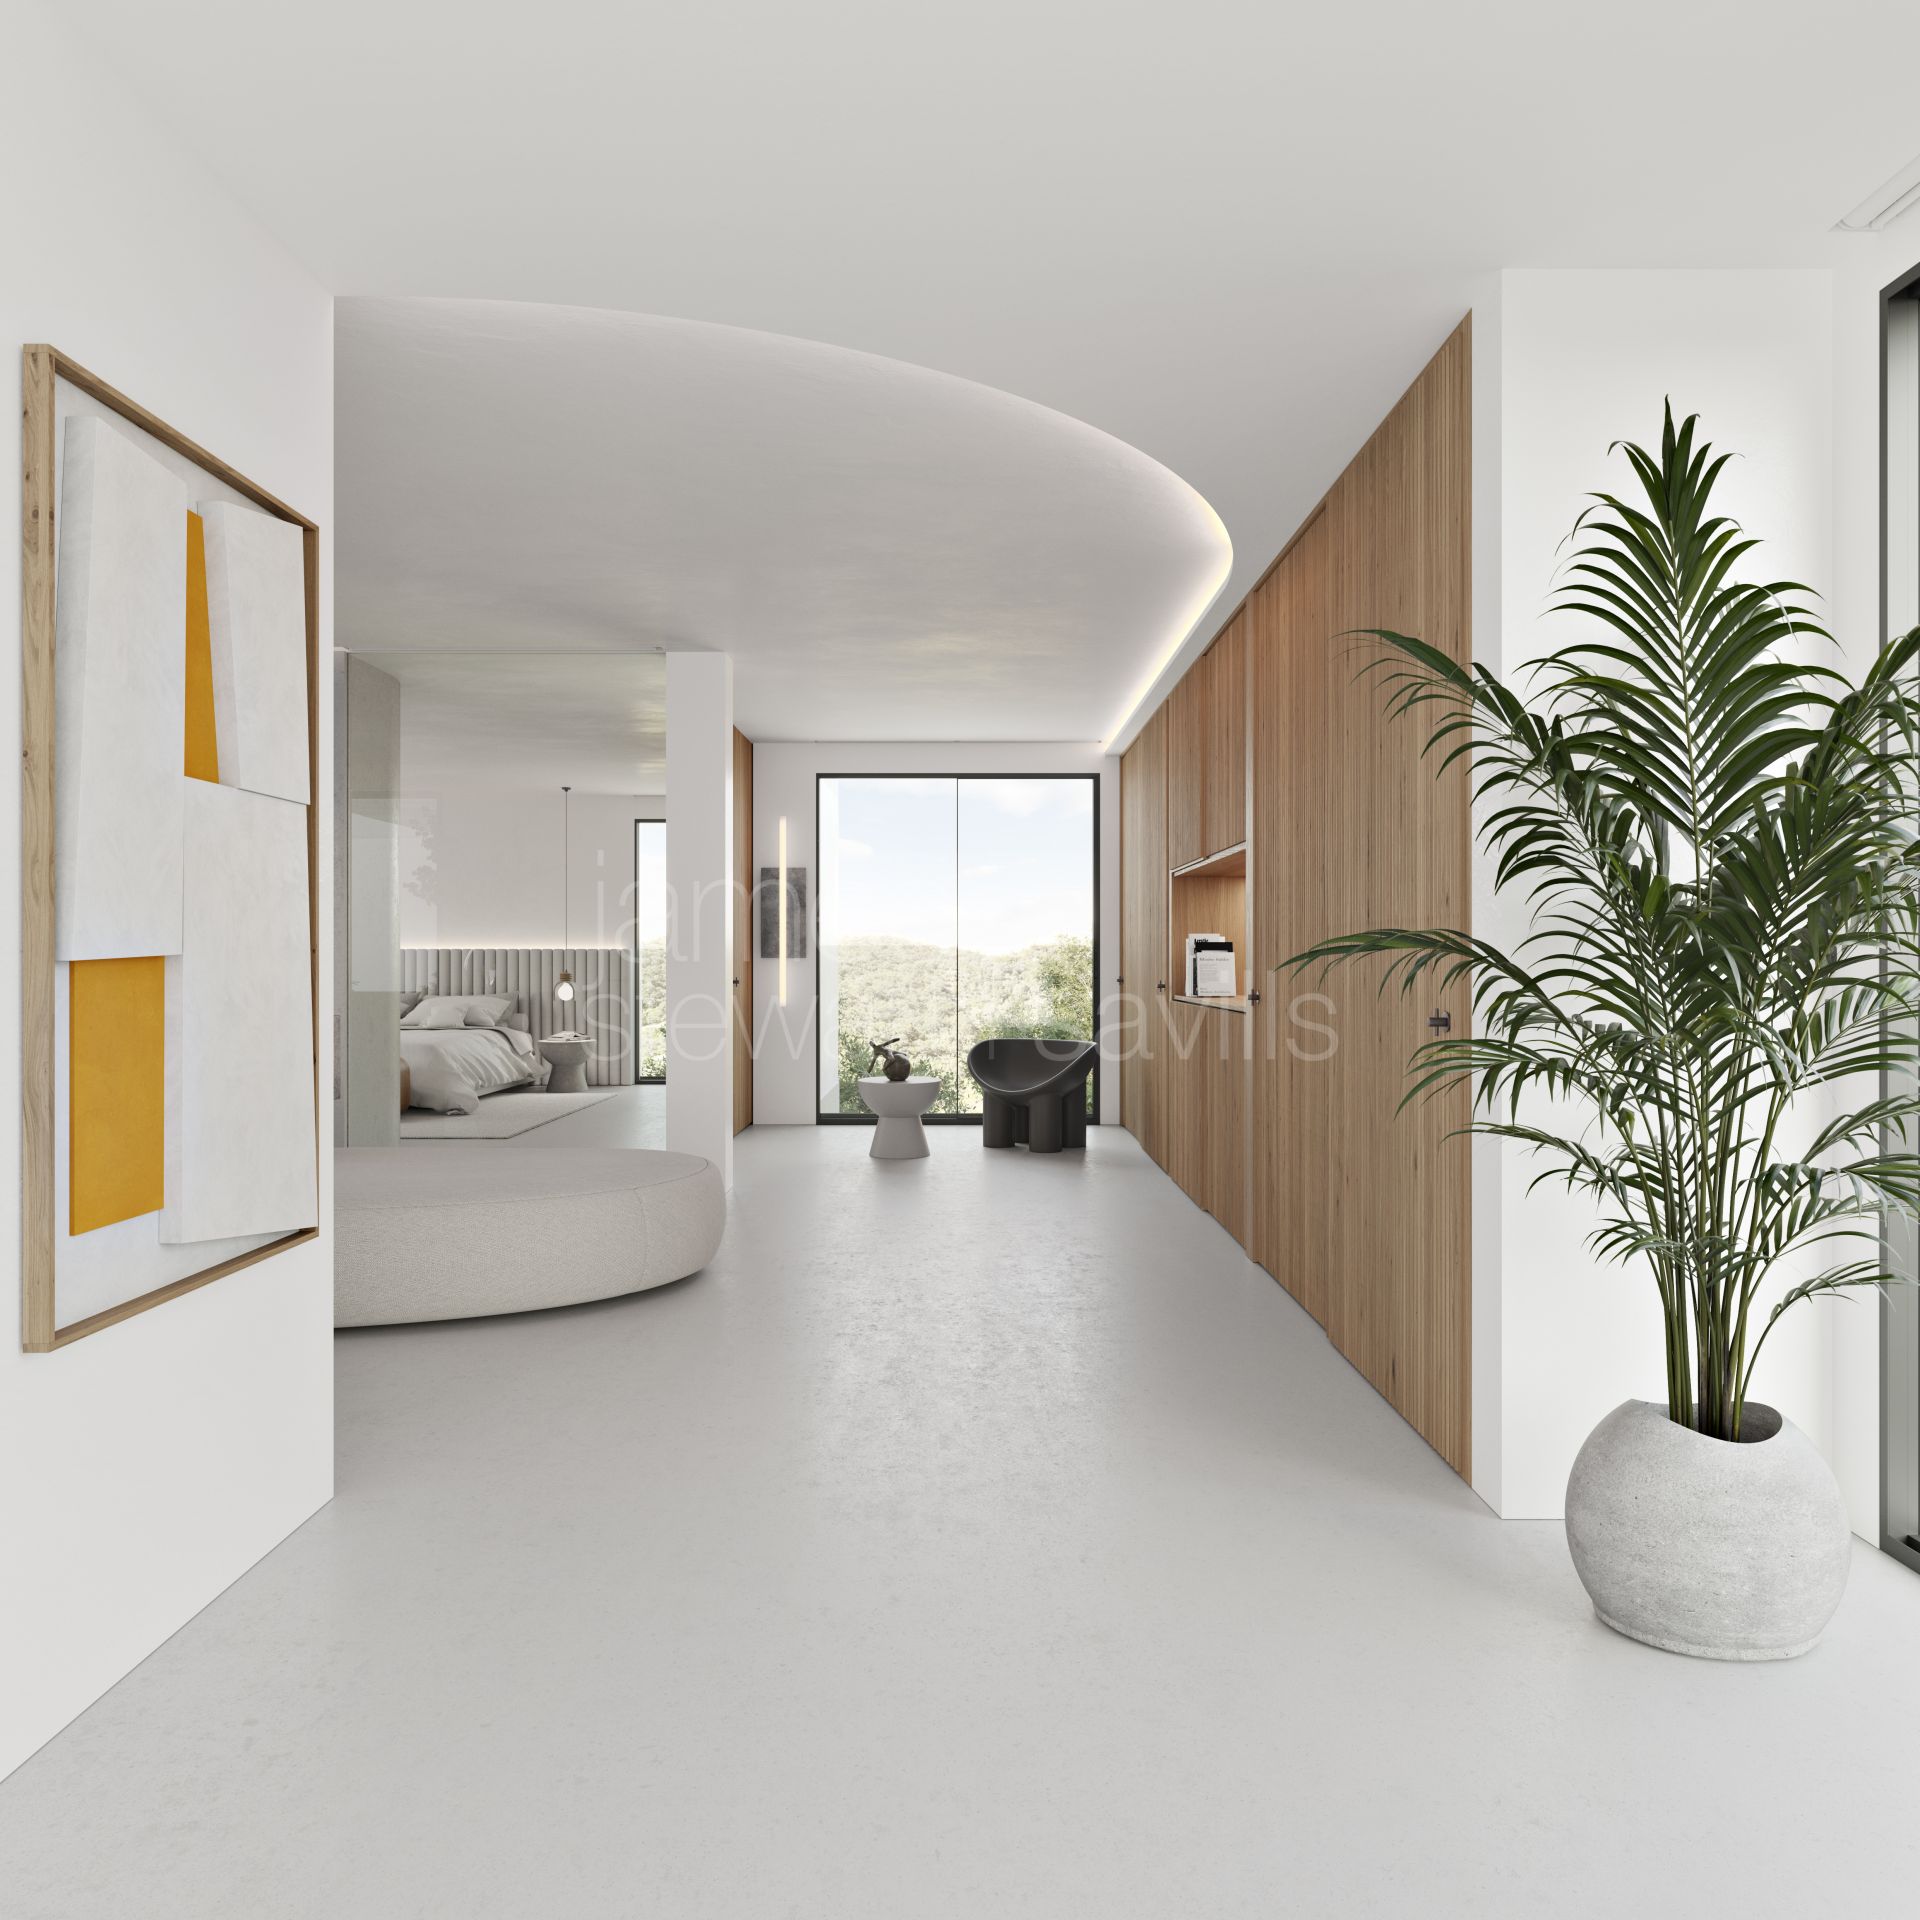 Fabulous new project of futuristic apartments next to Sotogrande - 4 bedrooms from € 2,187,000